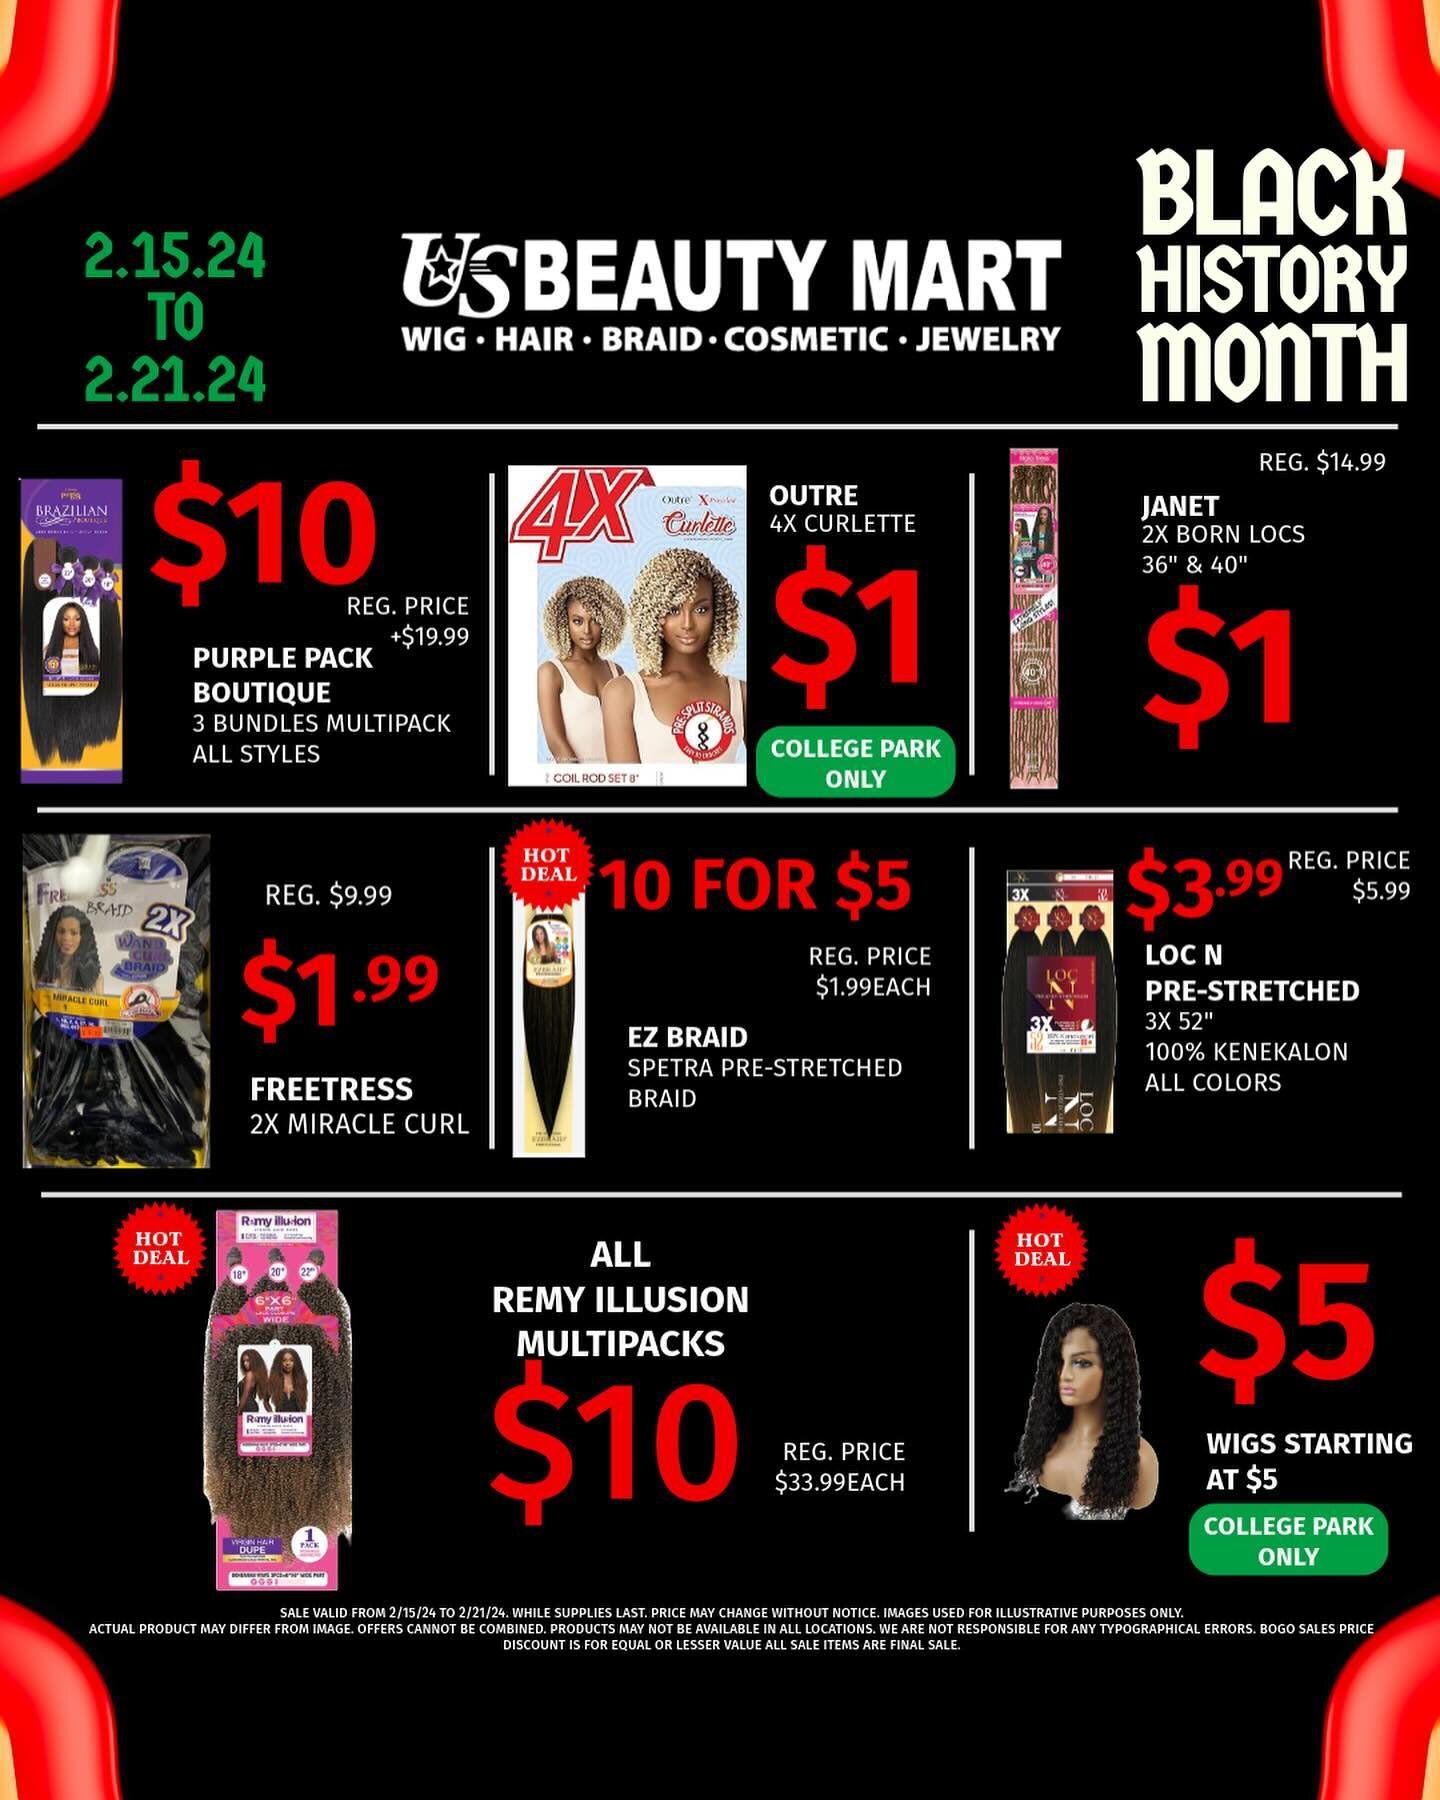 💚💛❤️Black History Month❤️💛💚

To celebrate Black History Month, we have the ultimate deals for this week!!

Make sure to tag 3 friends to enter for a chance to win $50 store voucher!!

Sale valid from 2.15.24 to 2.21.24 and we have added location 